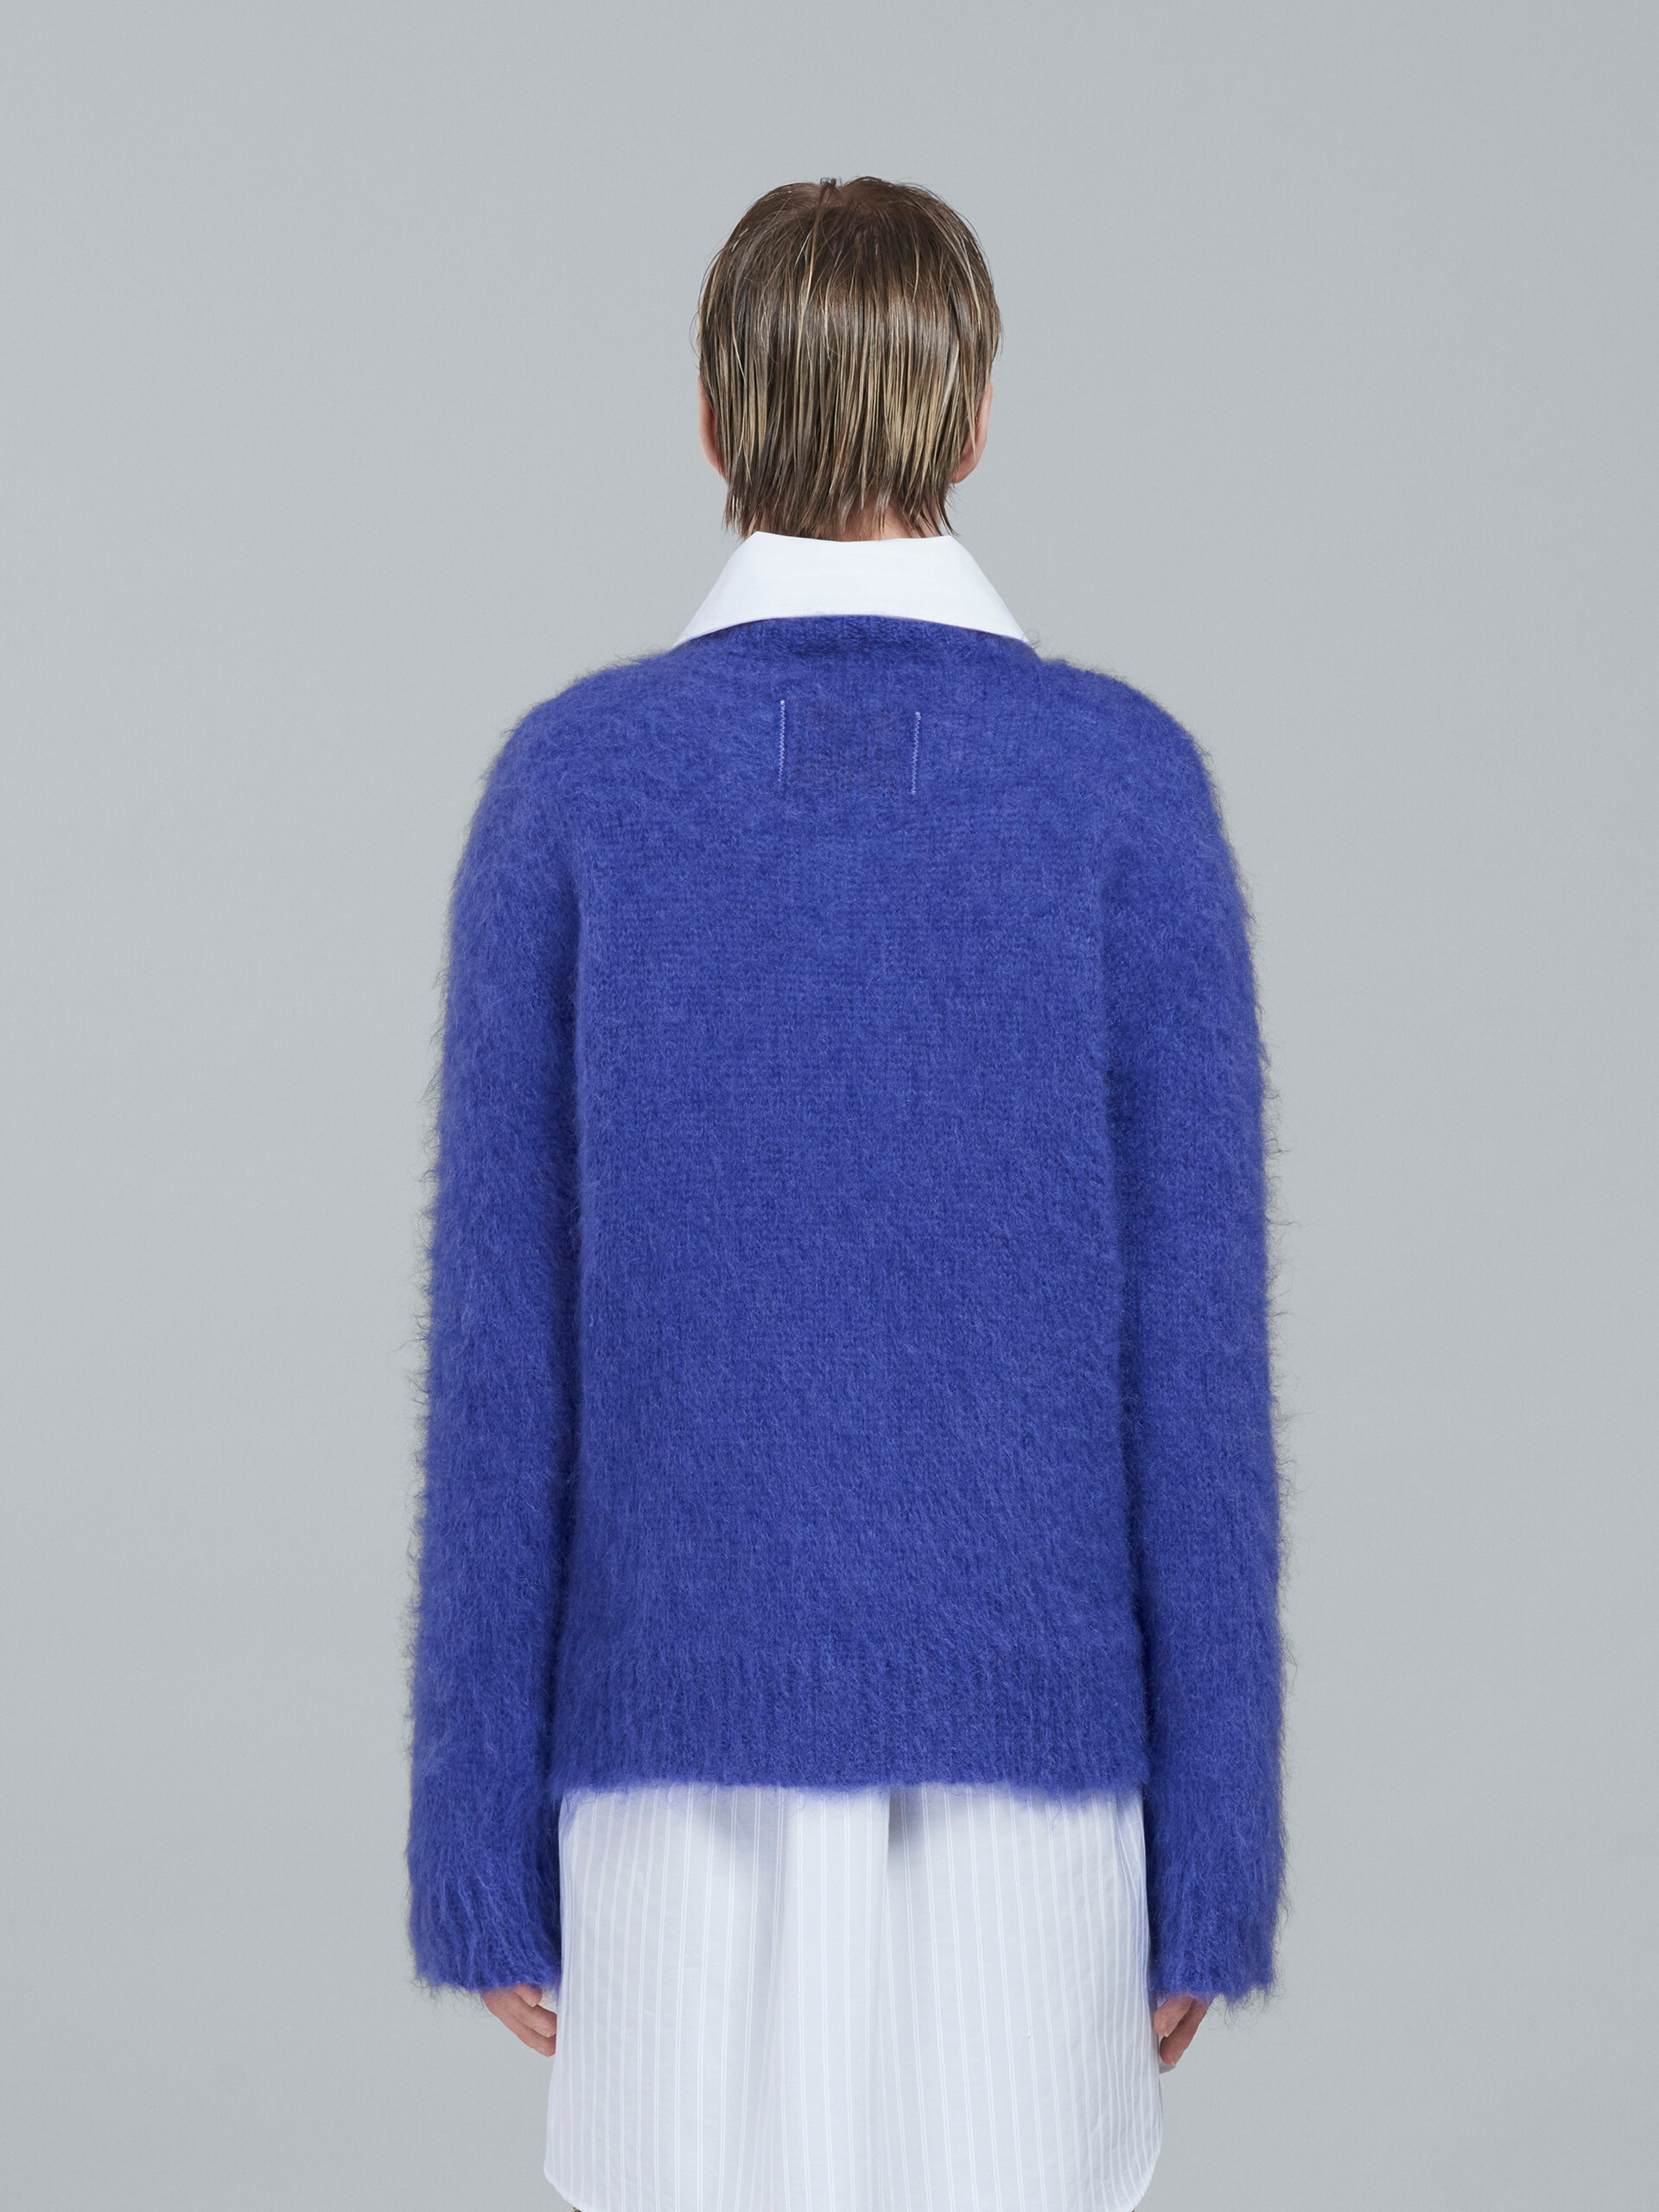 Mohair and wool crewneck sweater - Pullovers - Image 3